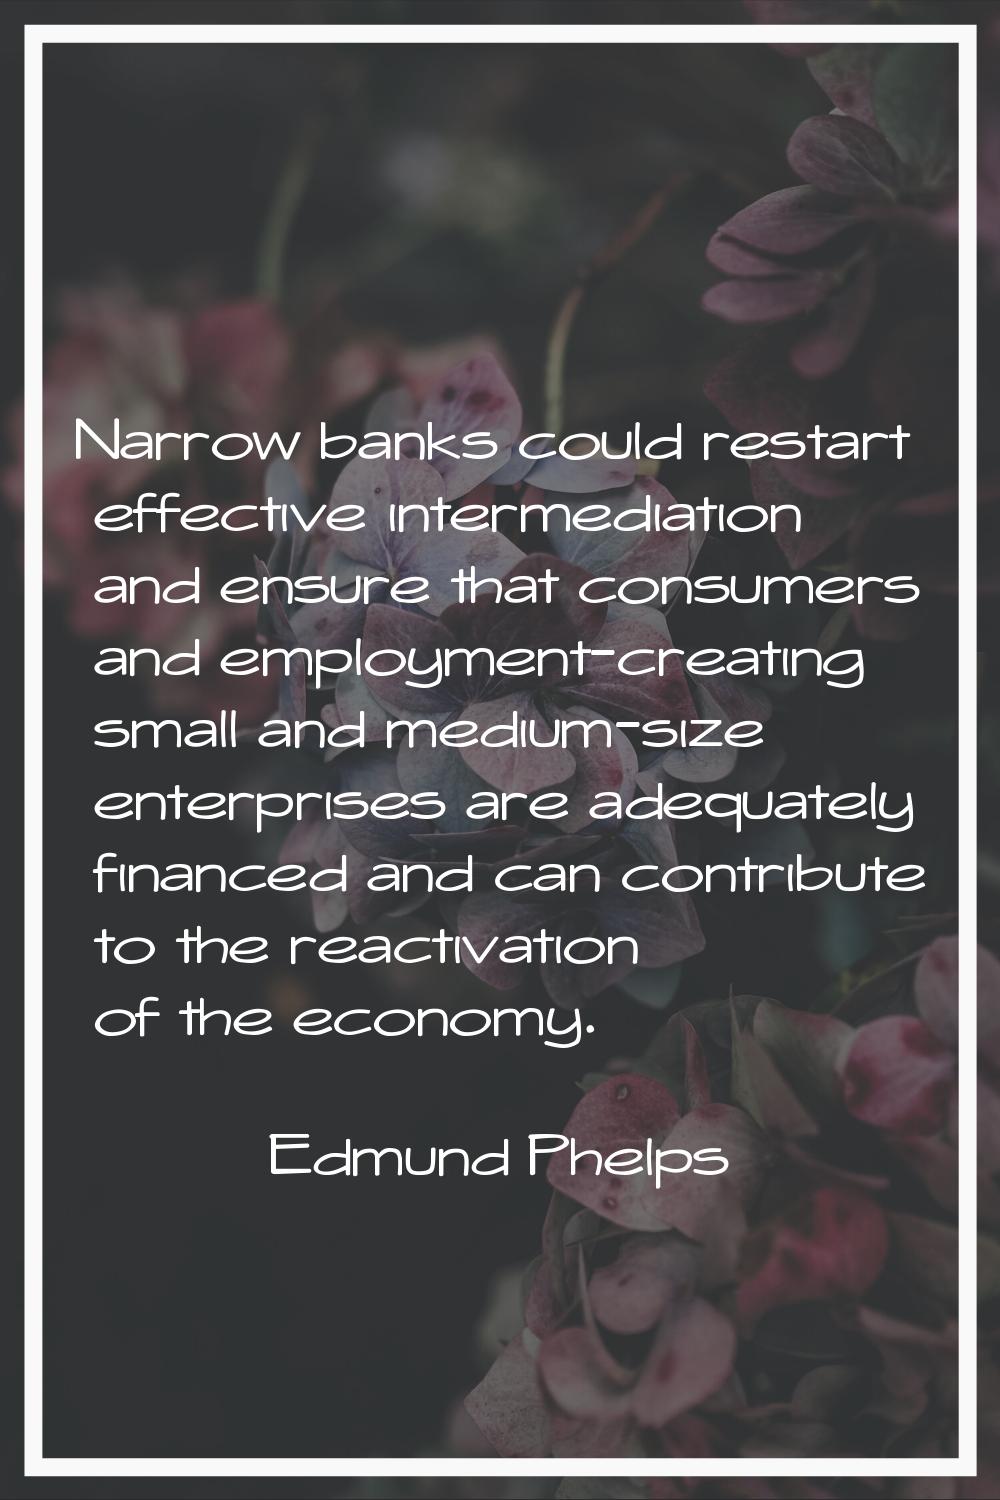 Narrow banks could restart effective intermediation and ensure that consumers and employment-creati